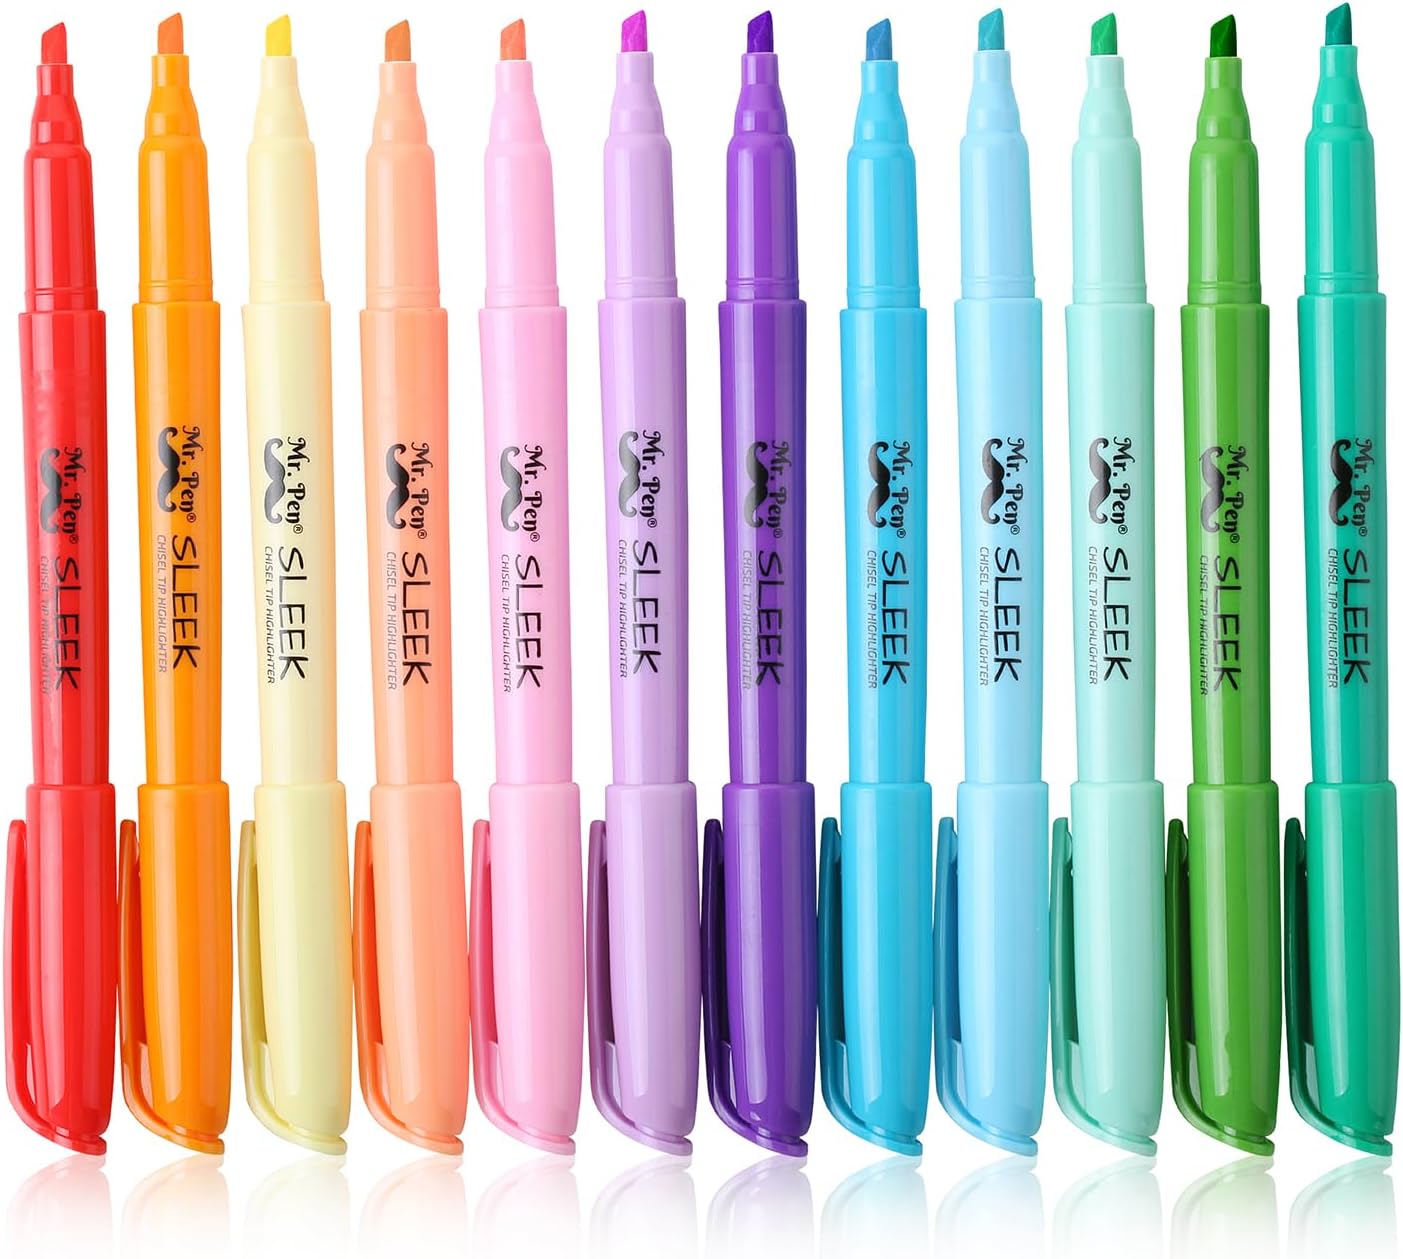 Mr. Pen- Pastel Highlighters, 12 Pack, Assorted Colors, Fast Dry, Highlighter Pastel, Set, Bible Journaling Highlighter, Marker, Colored School Supplies